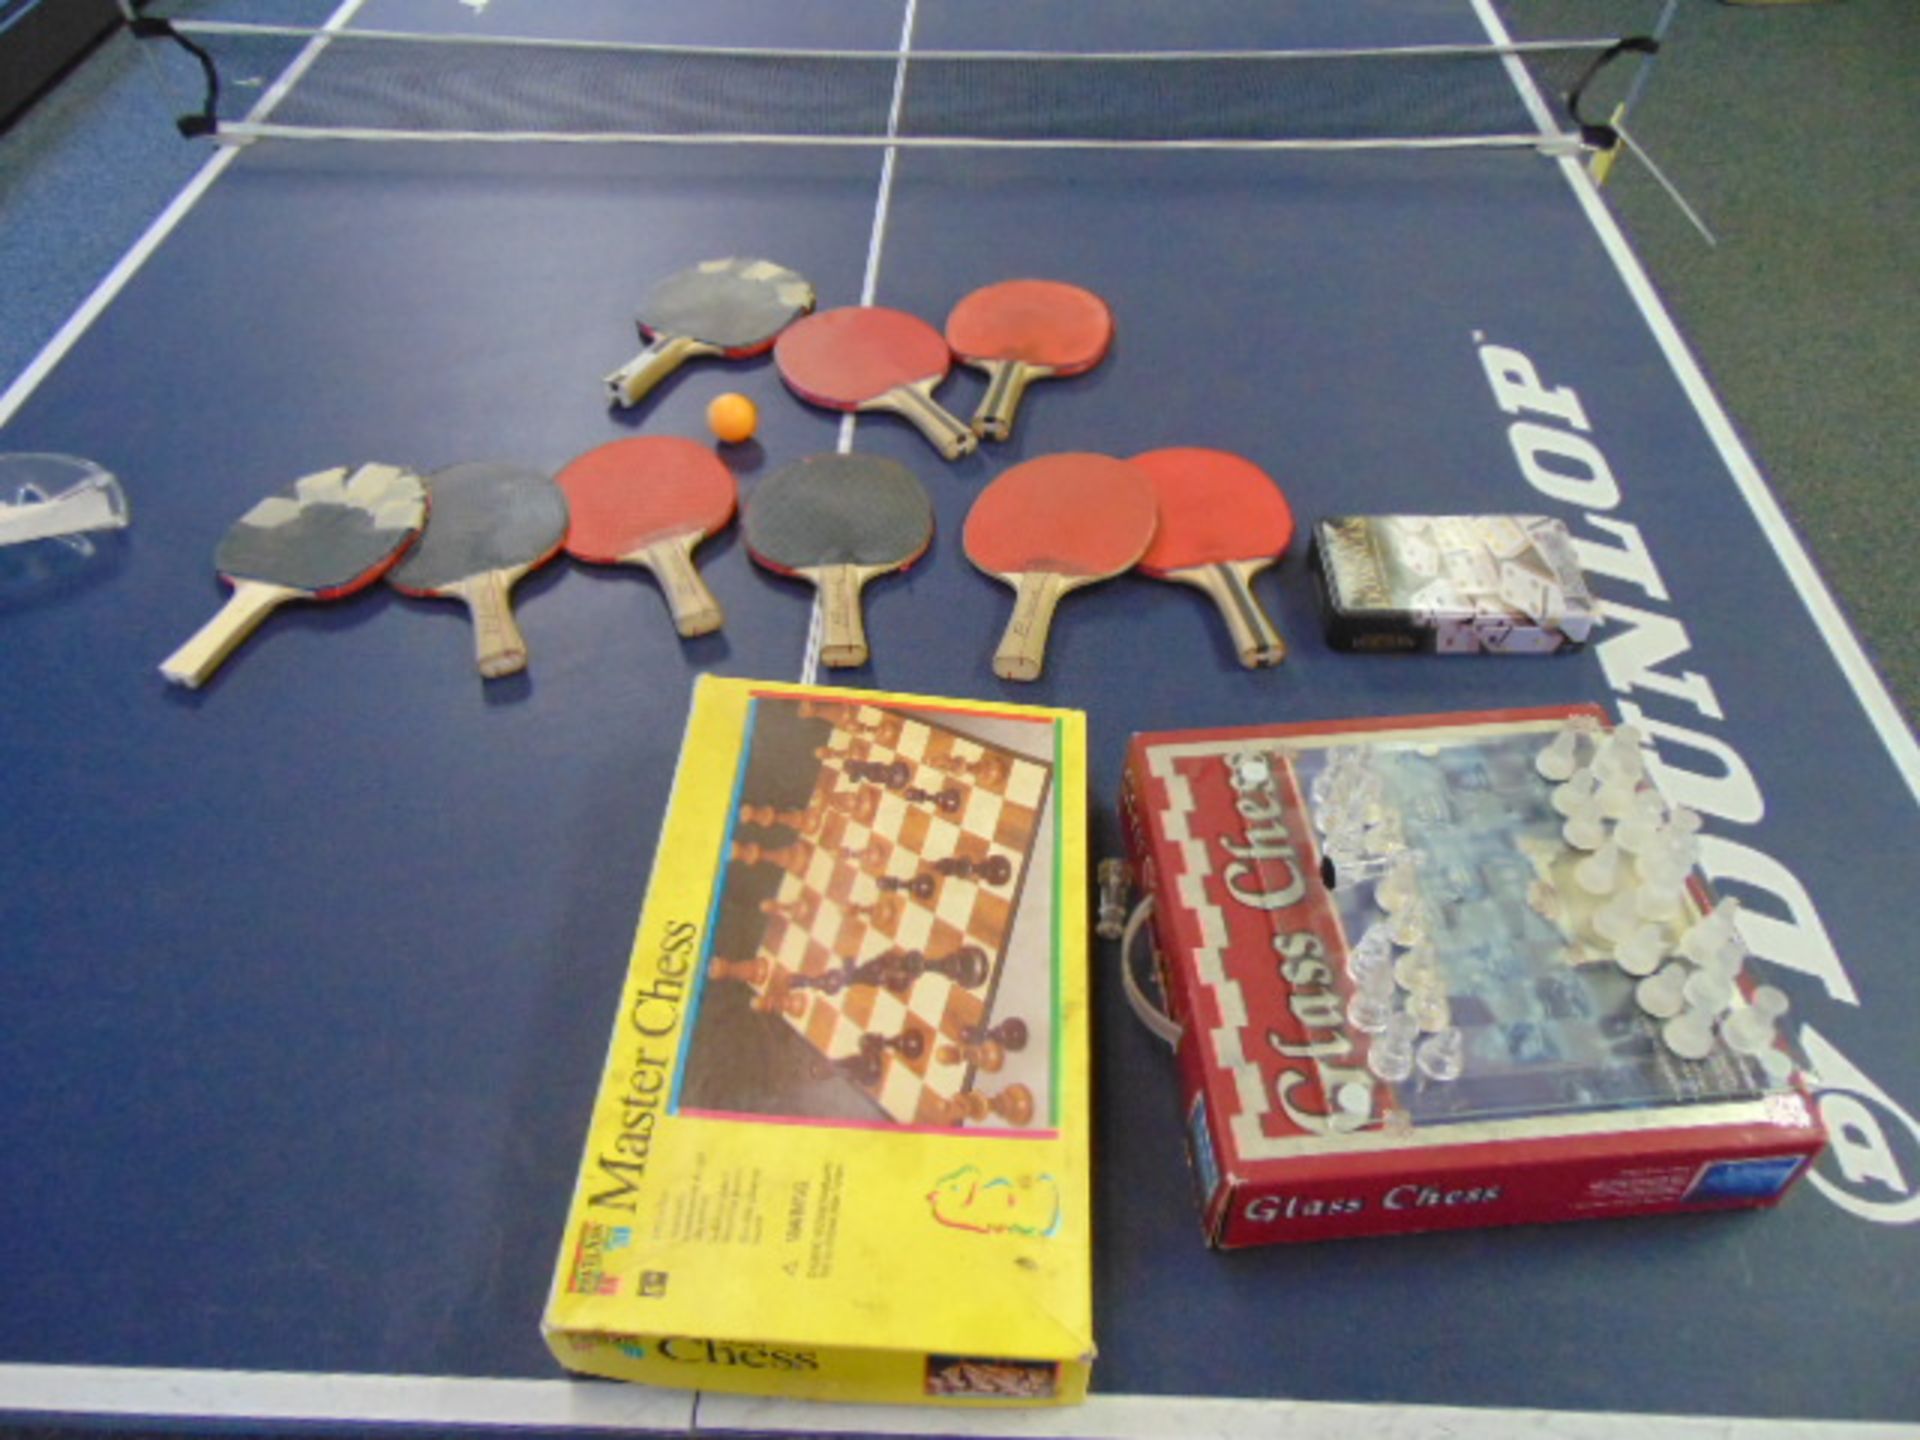 LOT CONSISTING OF: Dunlap ping pong table & assorted games - Image 3 of 3